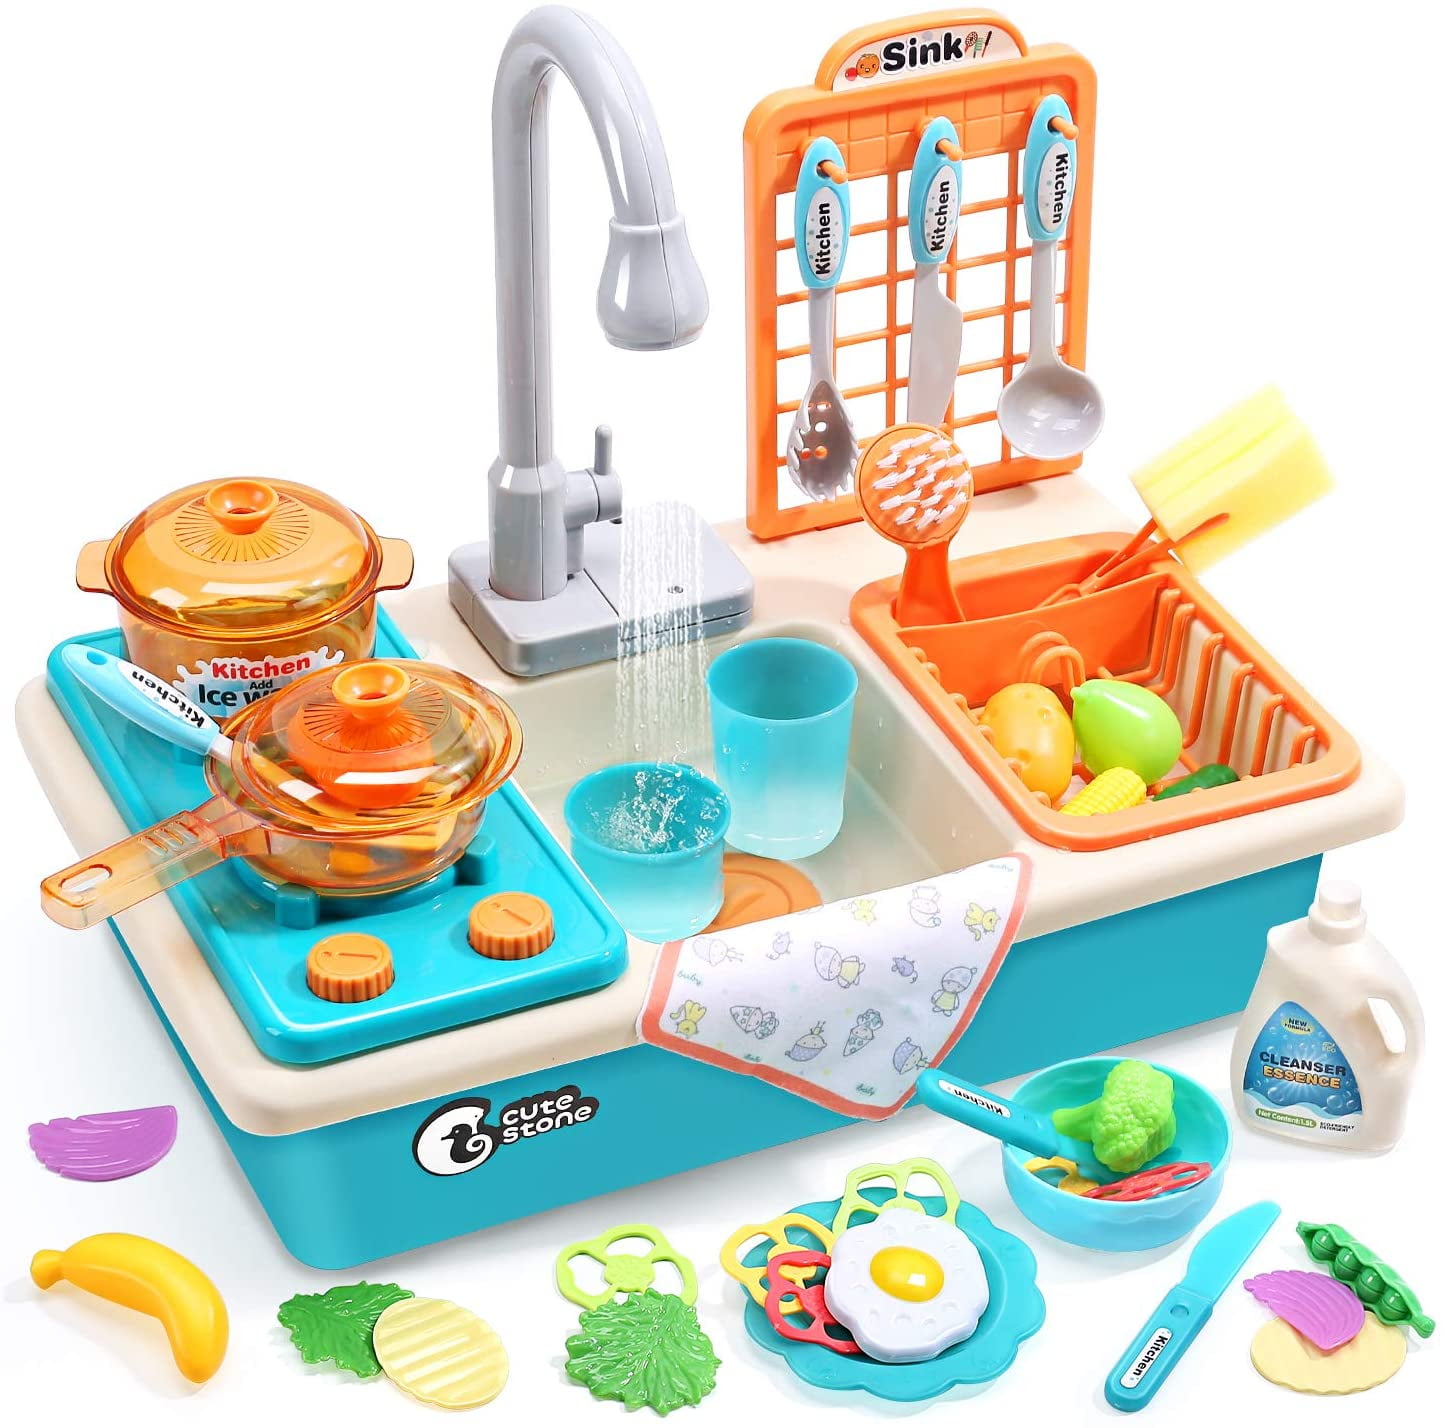 Pretend Play Kitchen Sink Toys with Play Cooking Stove Pot Pan Utensils For Kids 